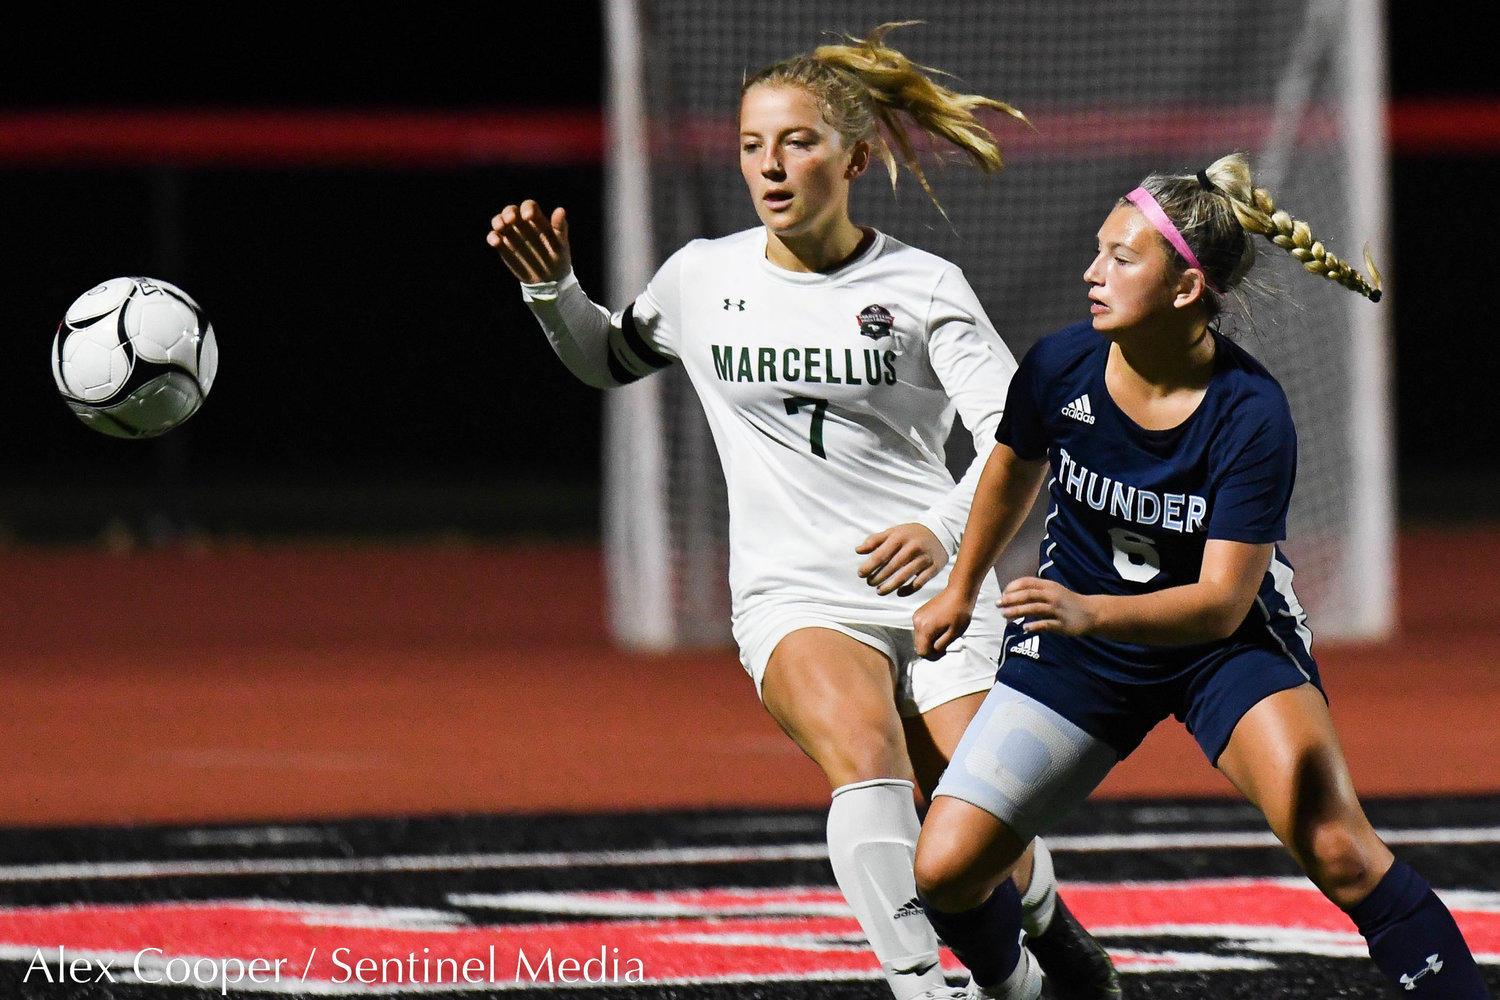 Central Valley Academy player Bella Kleban (6) fights for control of the ball with Marcellus player Rosa Stasyuk (7) during the Class B girls soccer semifinals game on Wednesday, Oct. 26 at Chittenango High School. CVA won 2-0.